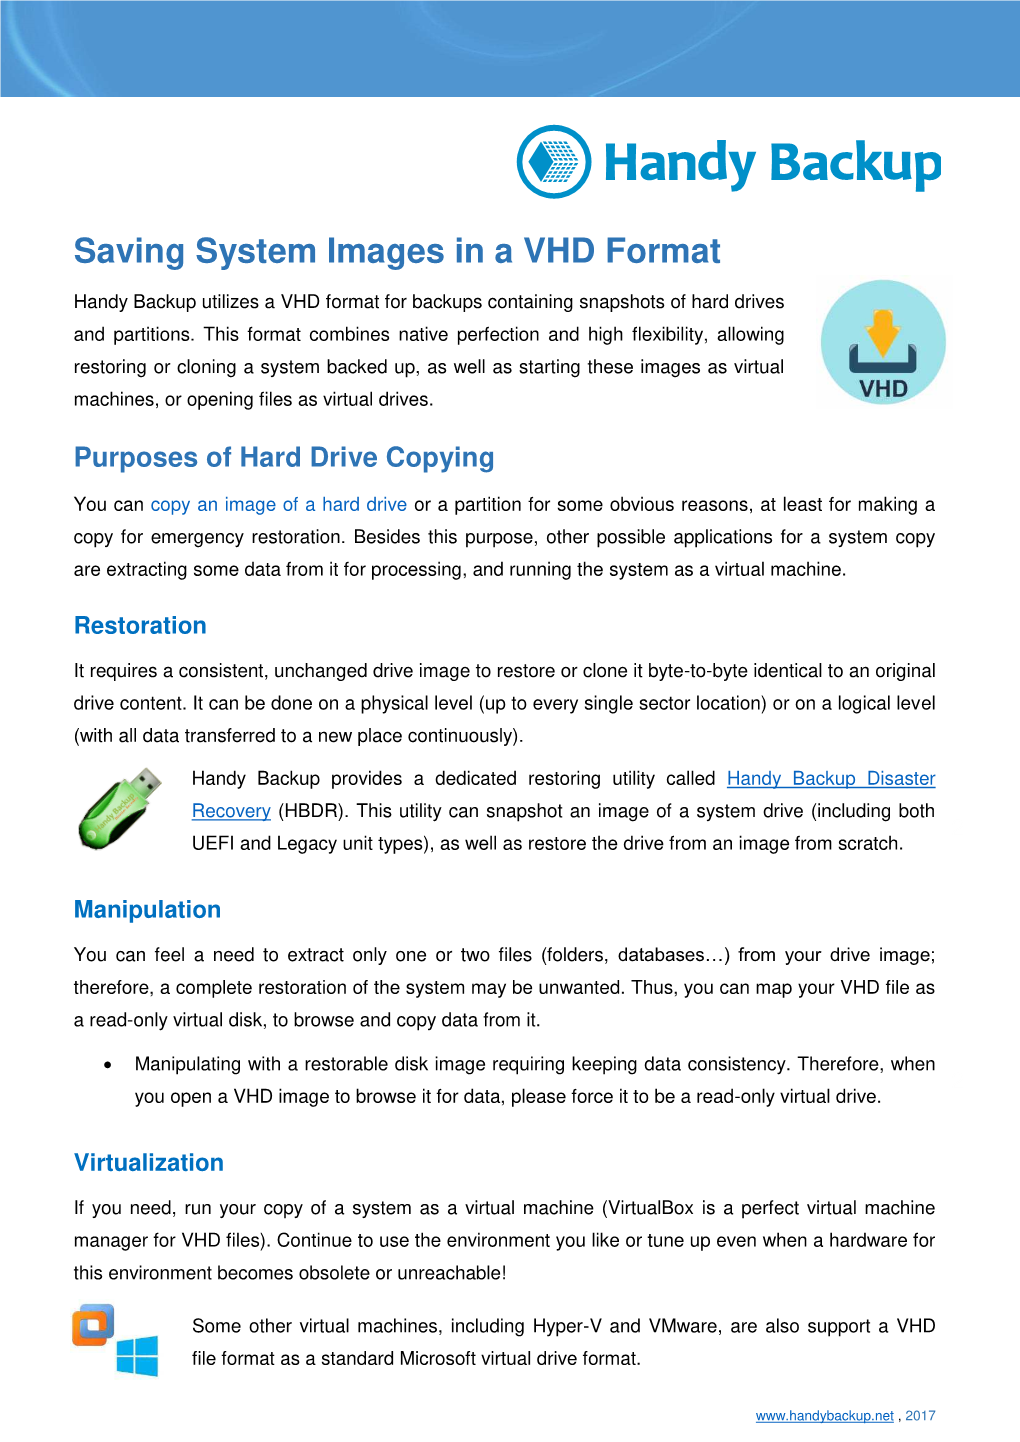 Saving System Images in a VHD Format